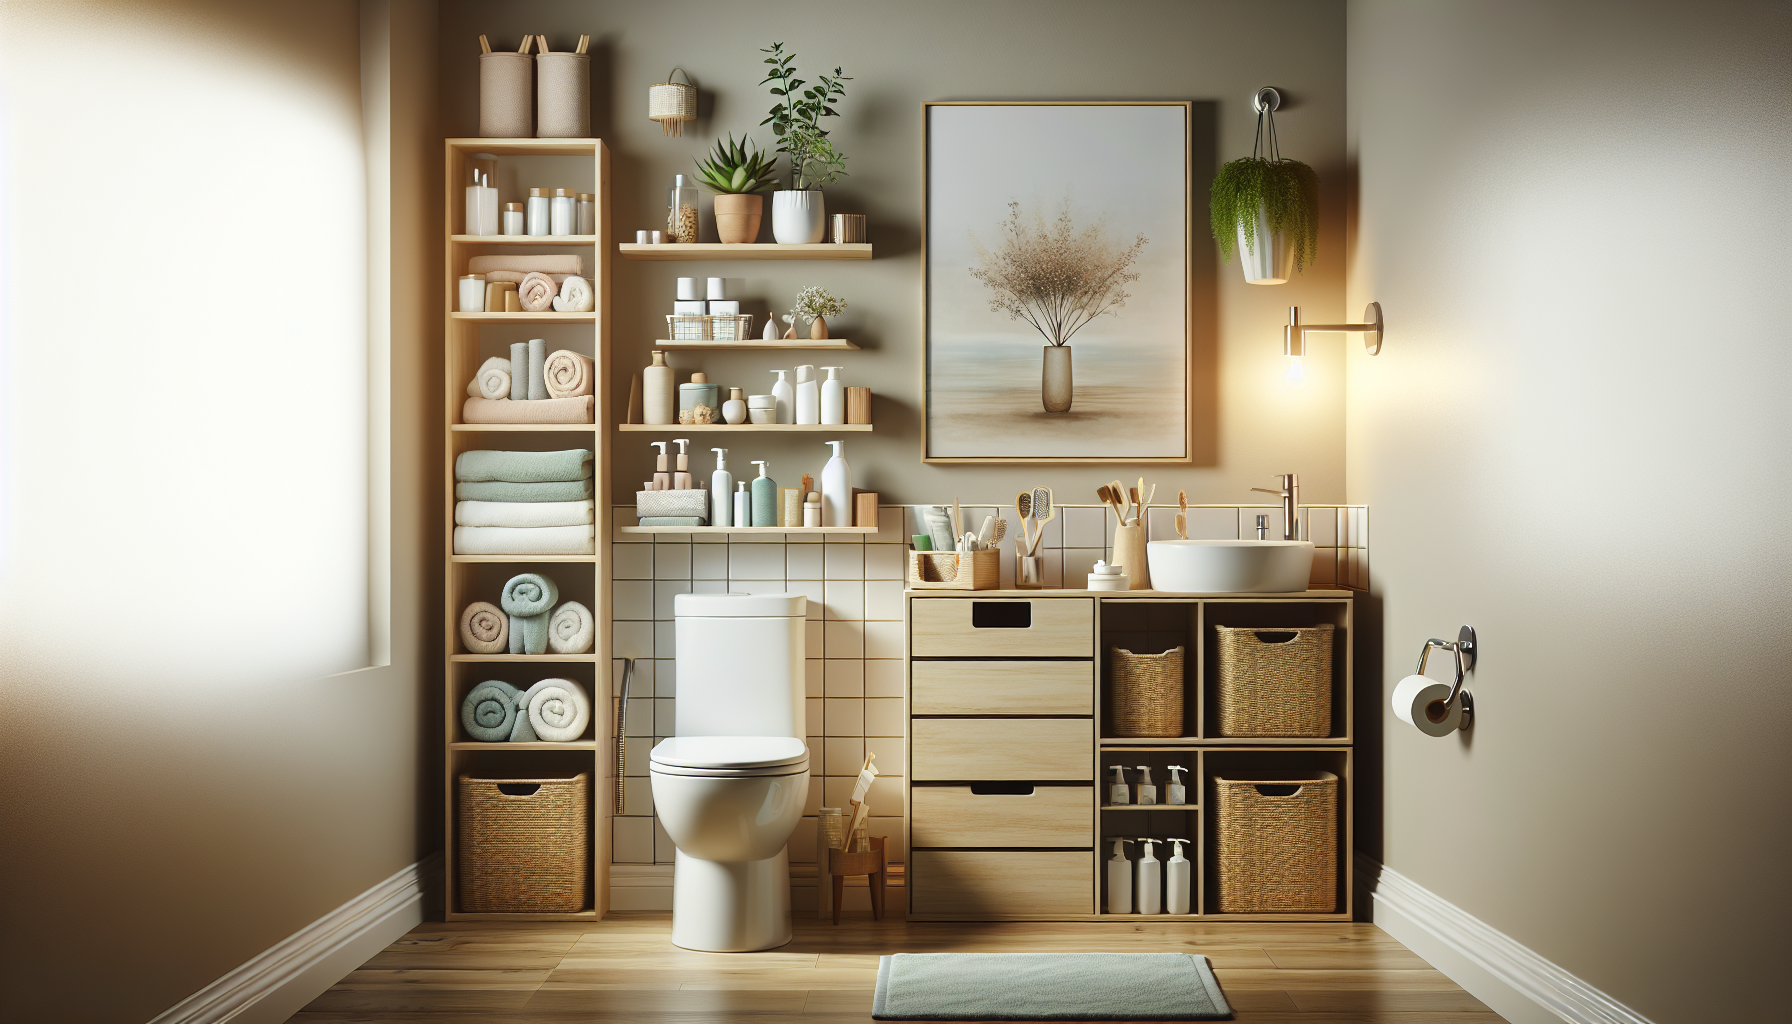 Discover the secrets of over-toilet storage systems: the good, bad and clean factor